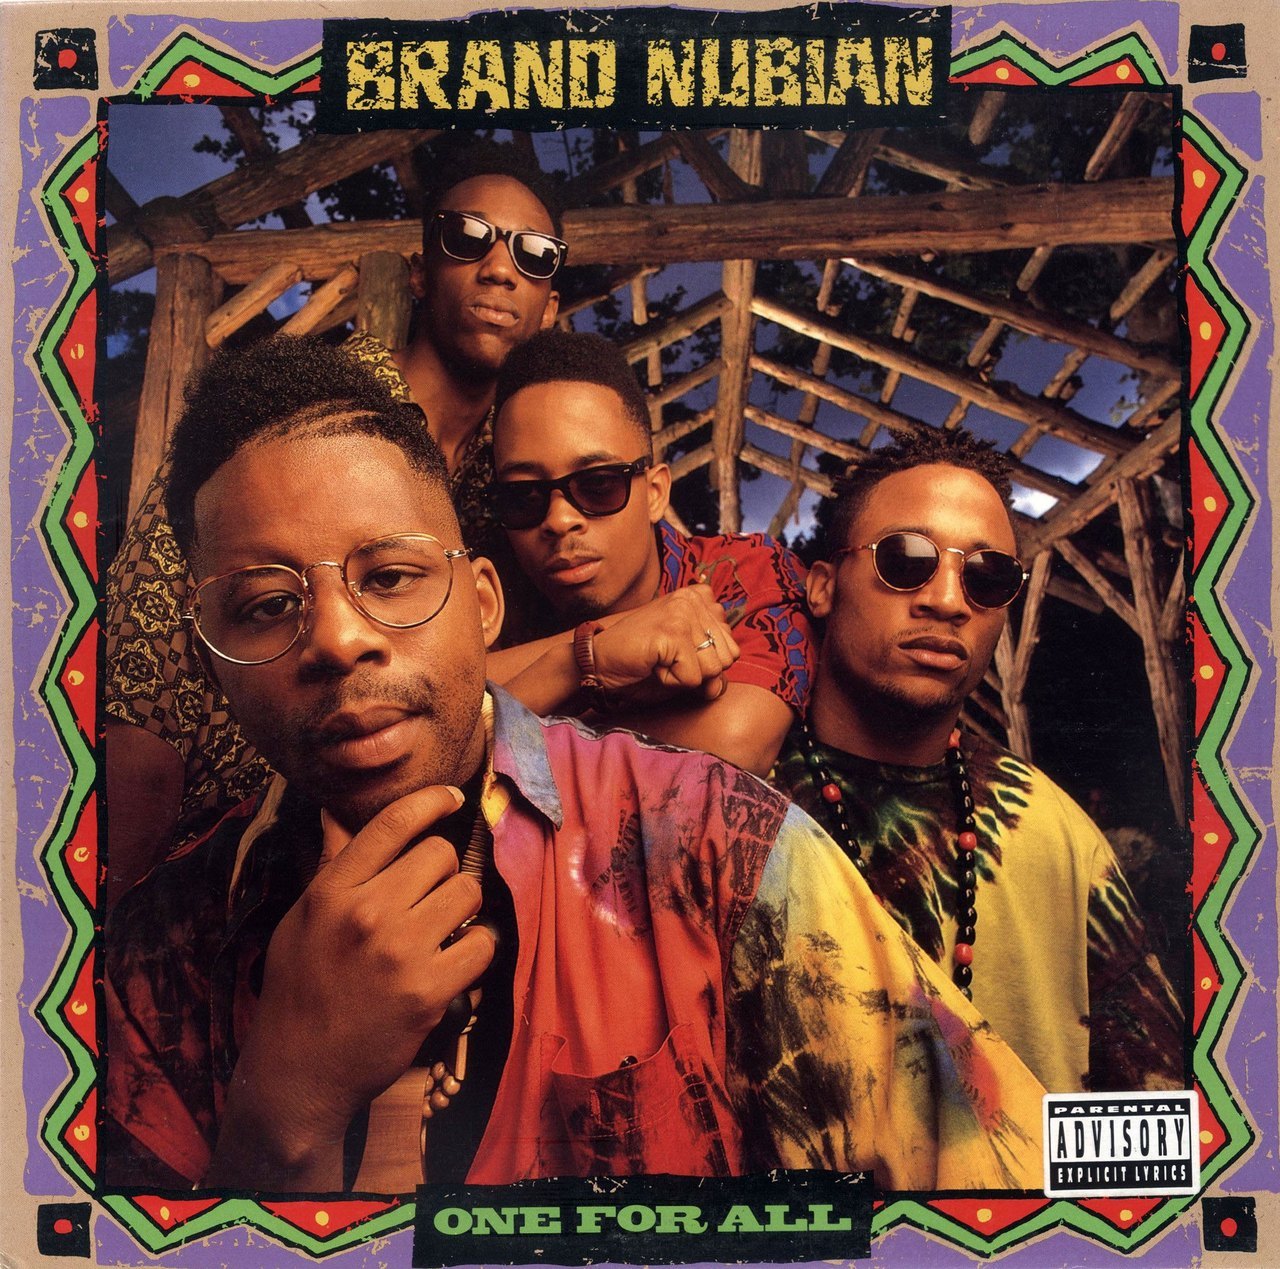 BACK IN THE DAY |12/4/90| Brand Nubian released their debut album, One for All, on